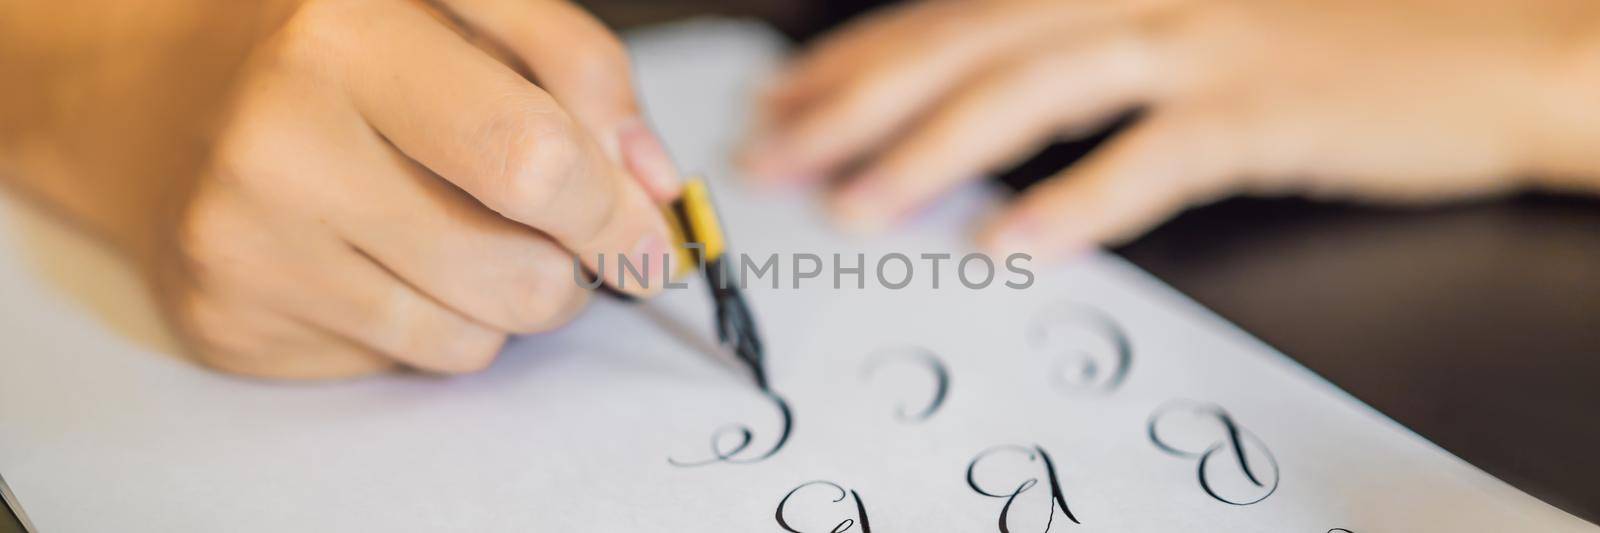 BANNER, LONG FORMAT Calligrapher Young Woman writes phrase on white paper. Inscribing ornamental decorated letters. Calligraphy, graphic design, lettering, handwriting, creation concept.